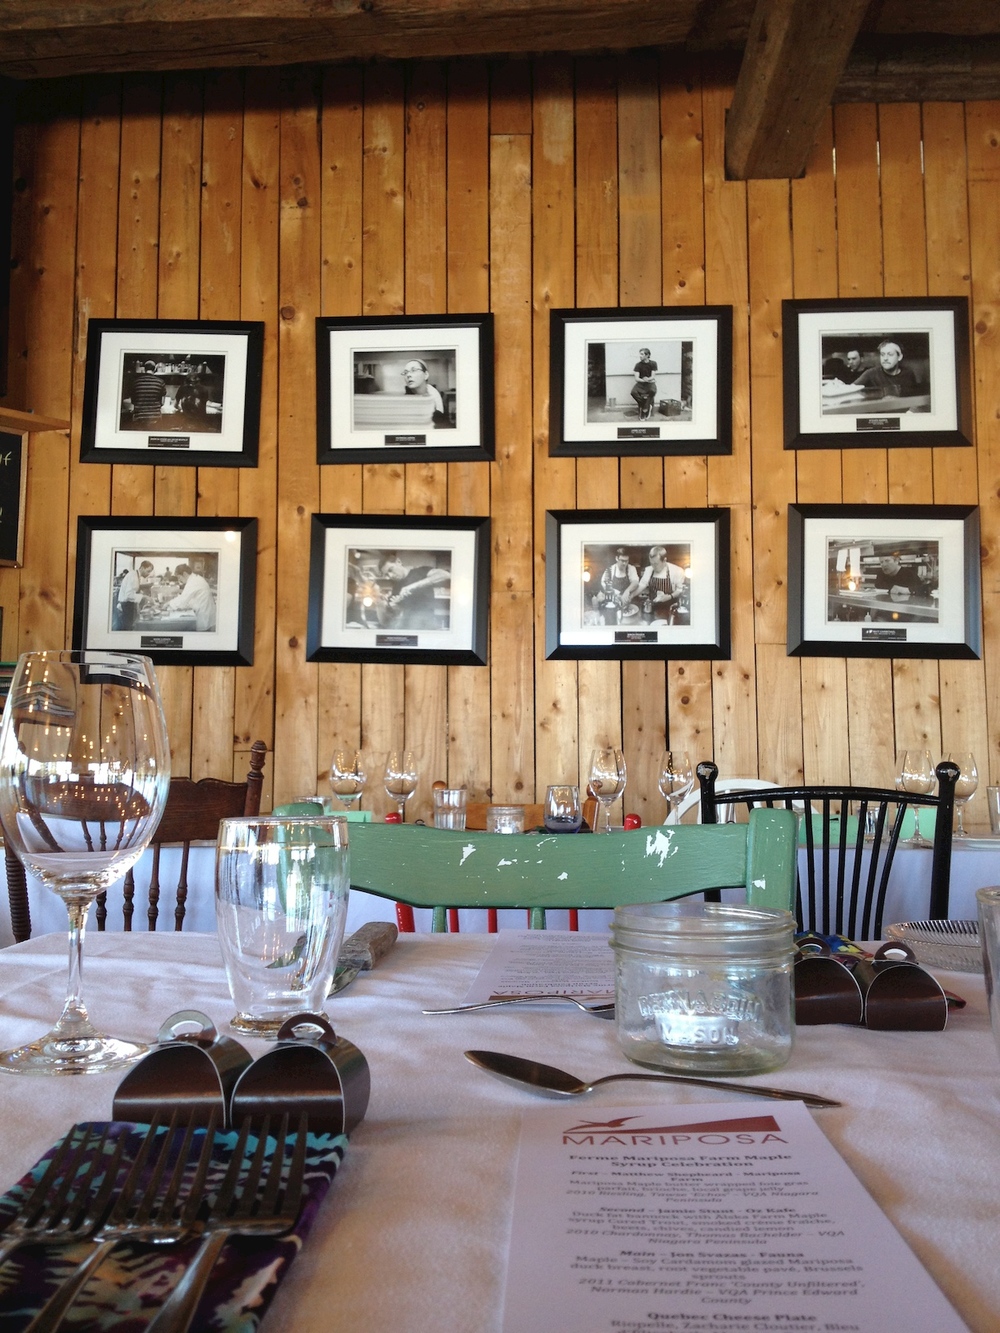  The country dining room and chef wall of fame at Mariposa Farm.​ 